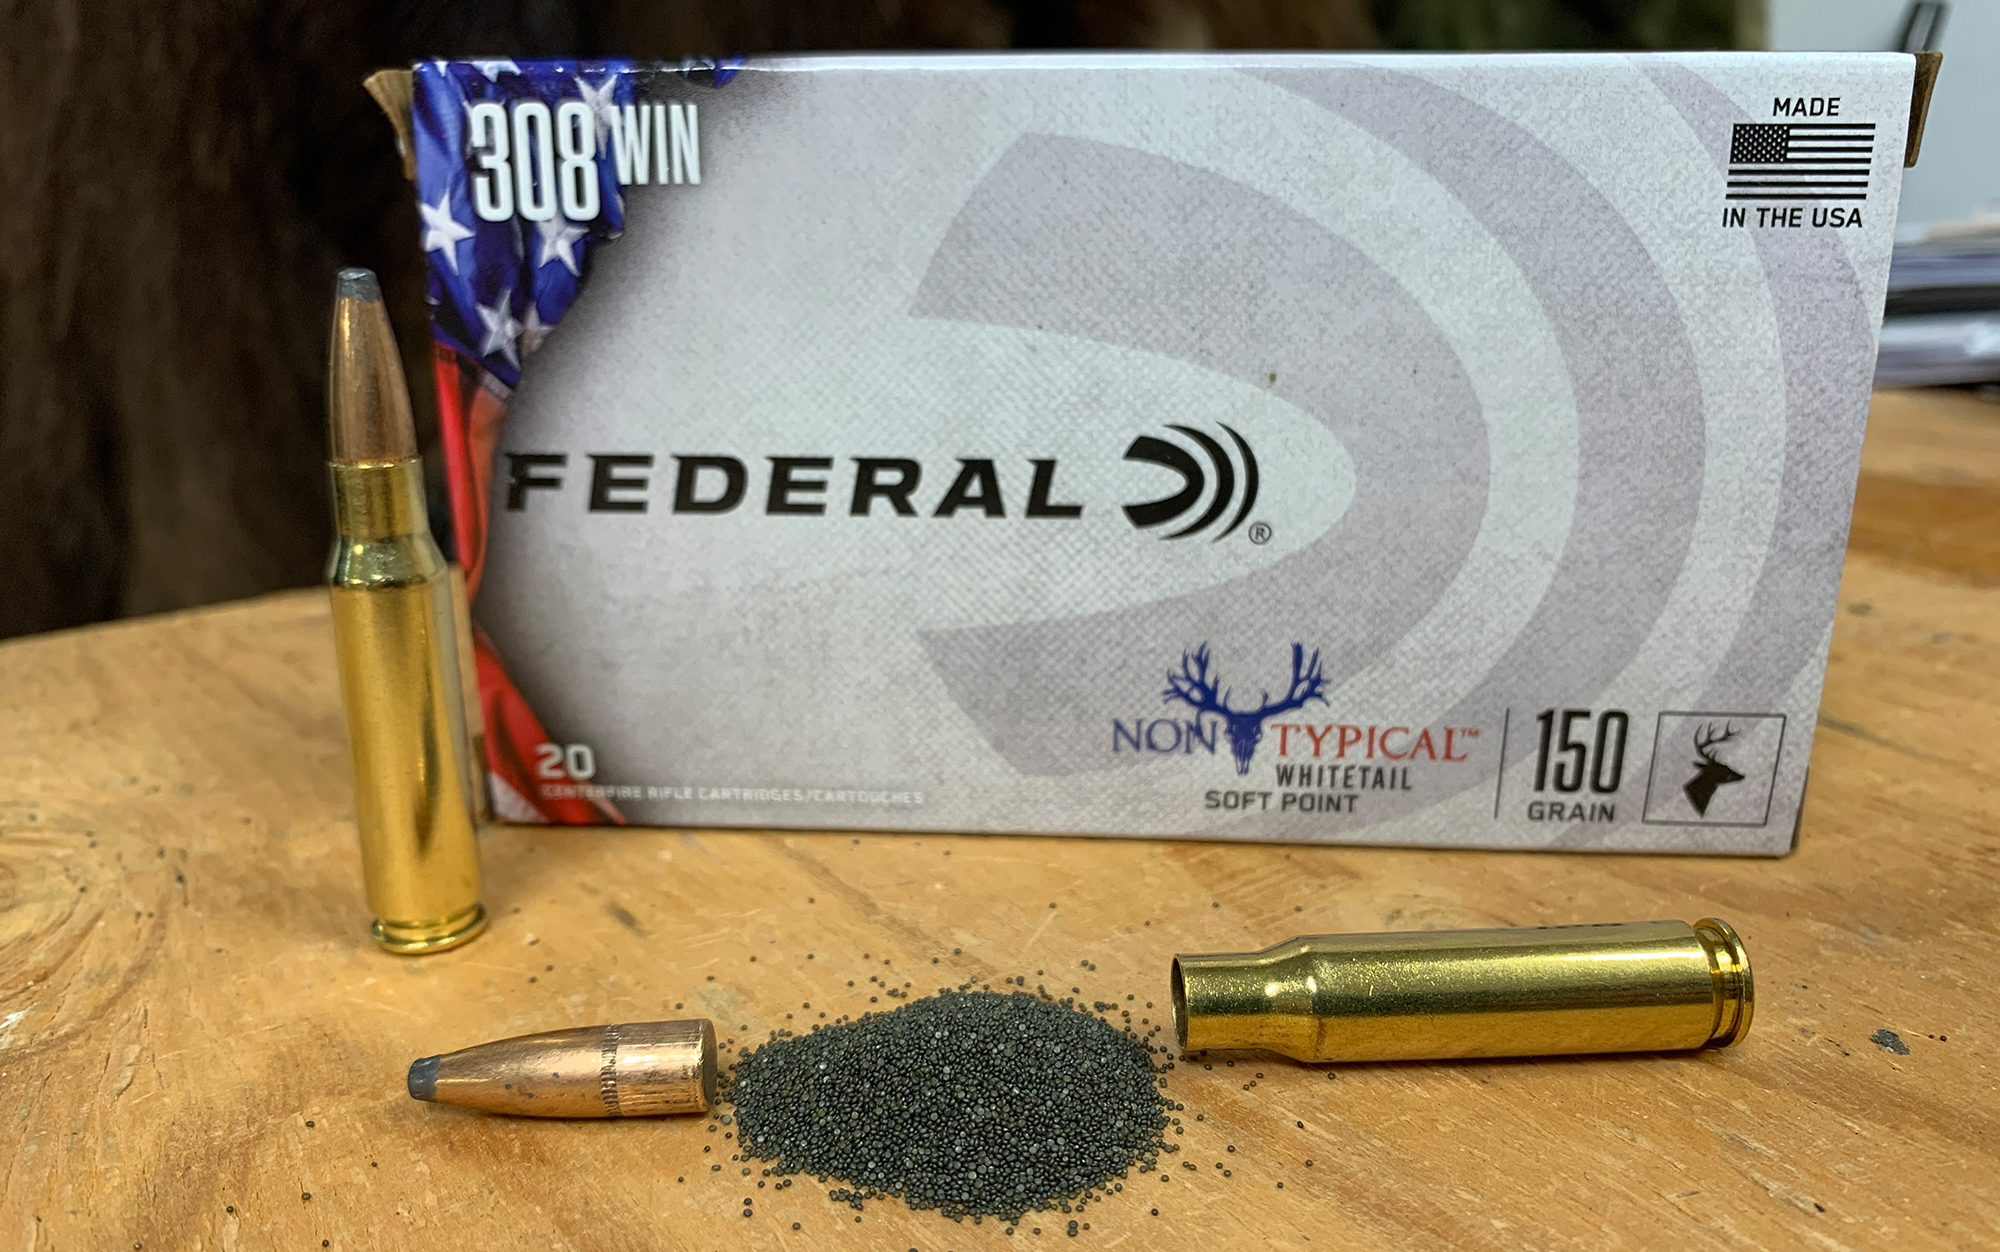 The Federal Non-Typical Whitetail 150-grain Soft Point is one of the best ammo for hunting.